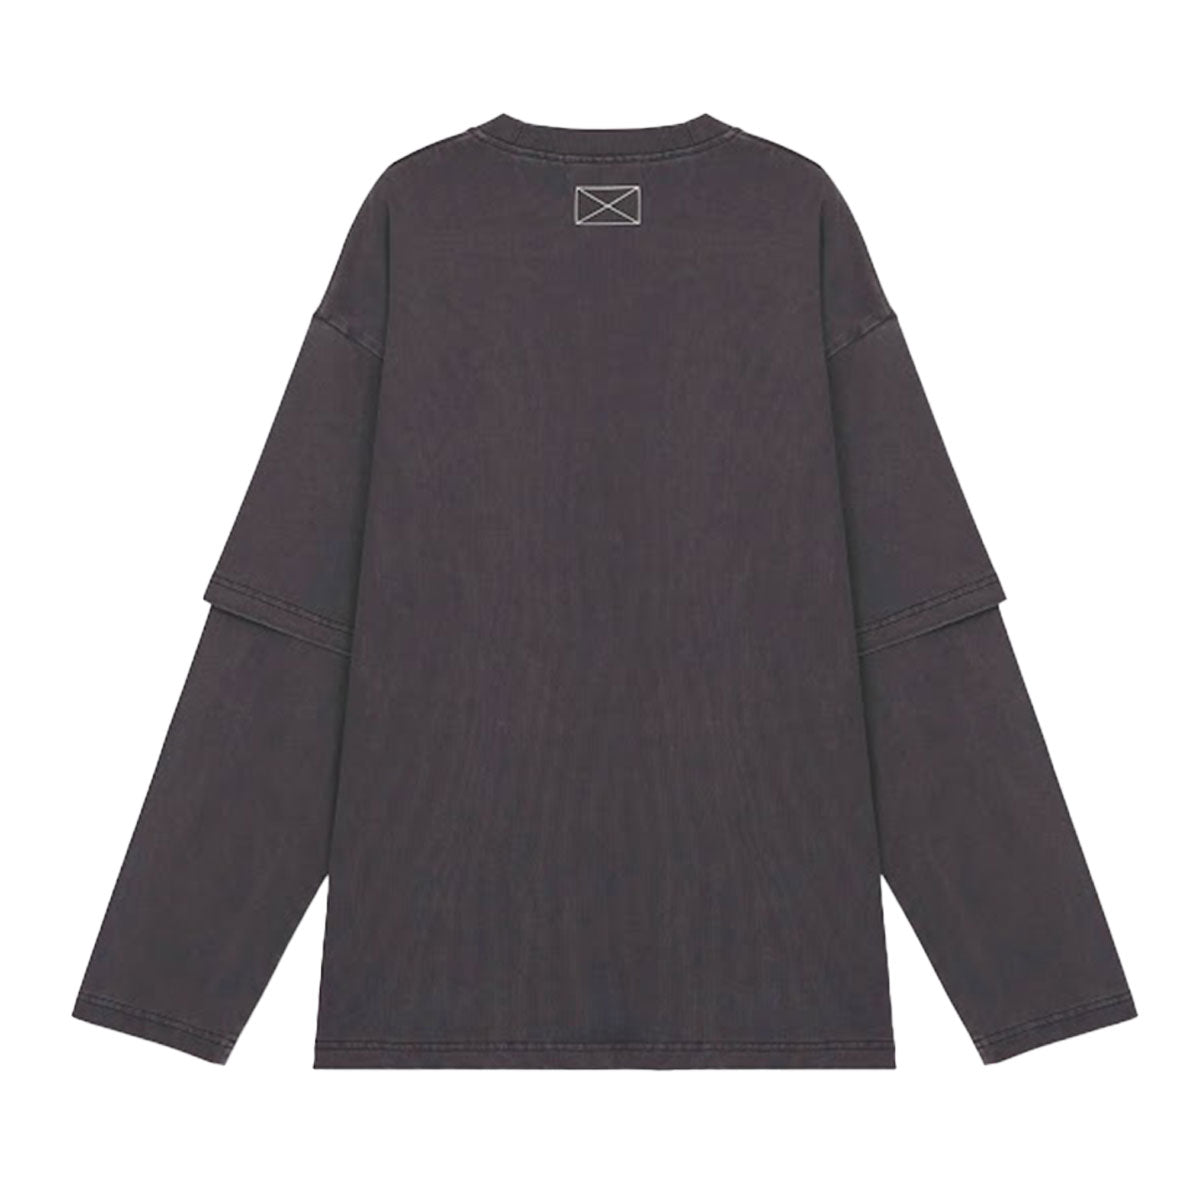 MLVINCE - SEVEN STARS LAYERED L/S TEE